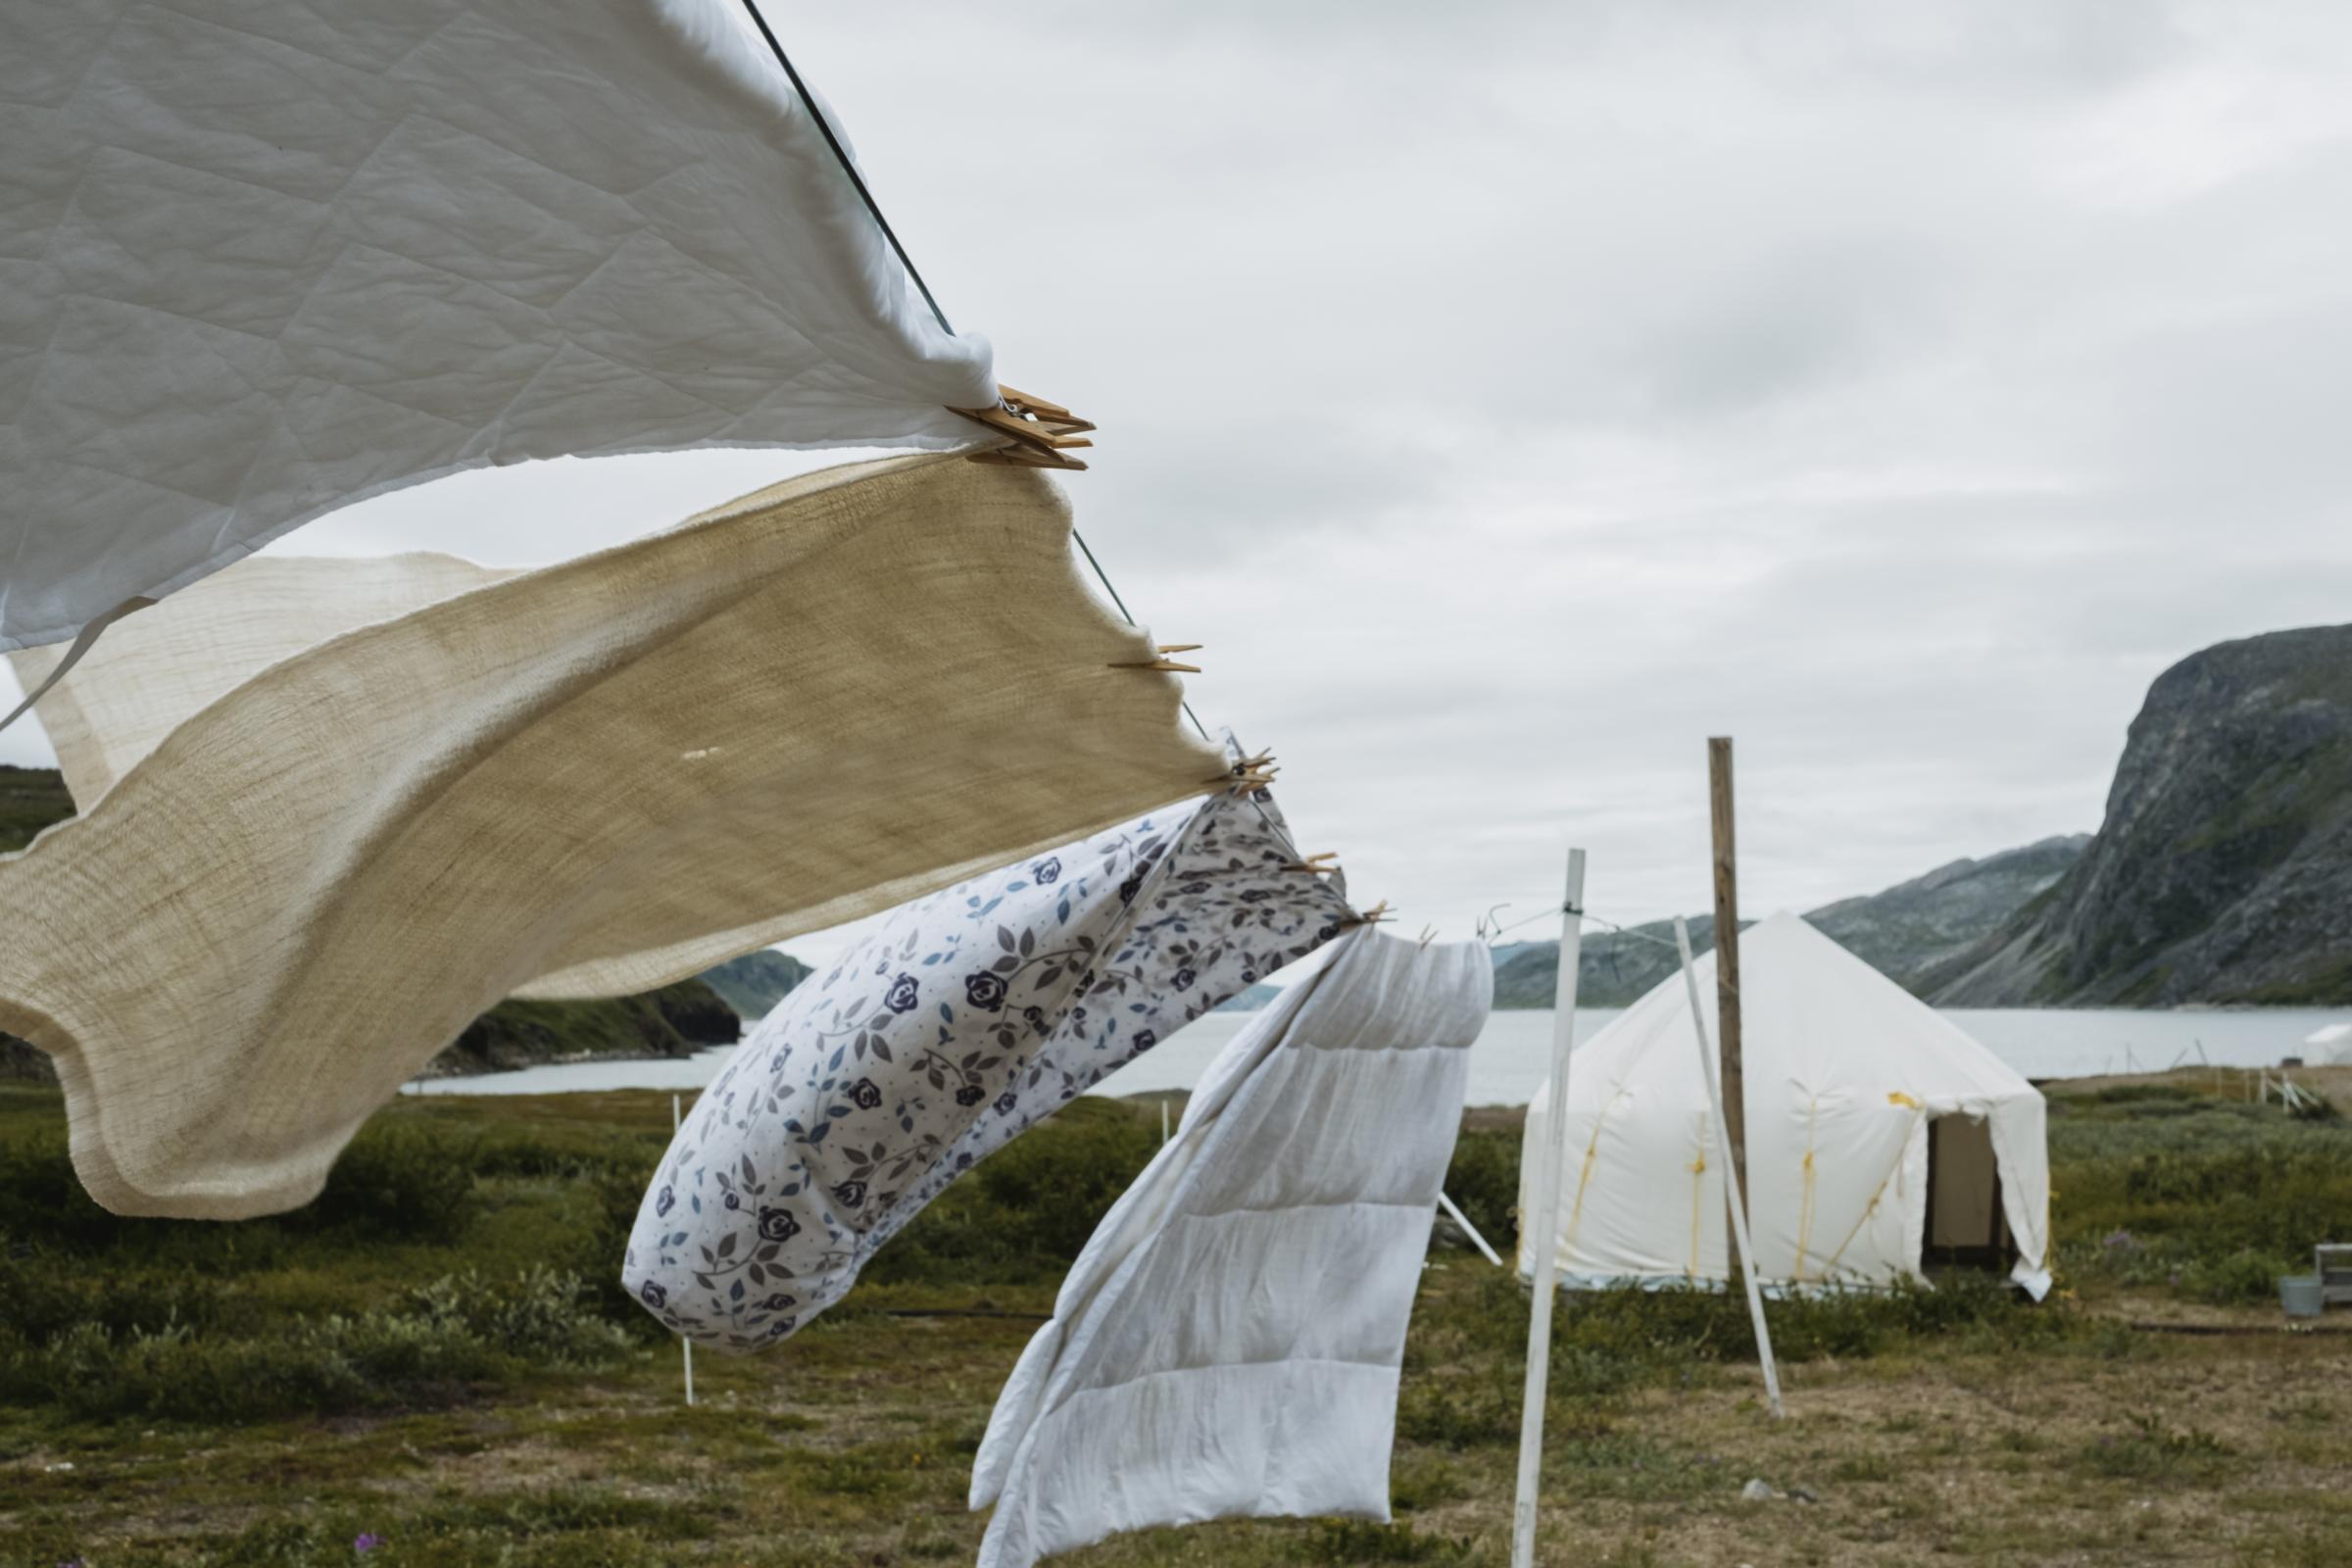 Place of Spirits - The Narwhal - Linen and bedsheets hang to dry at Torngat Mountains...